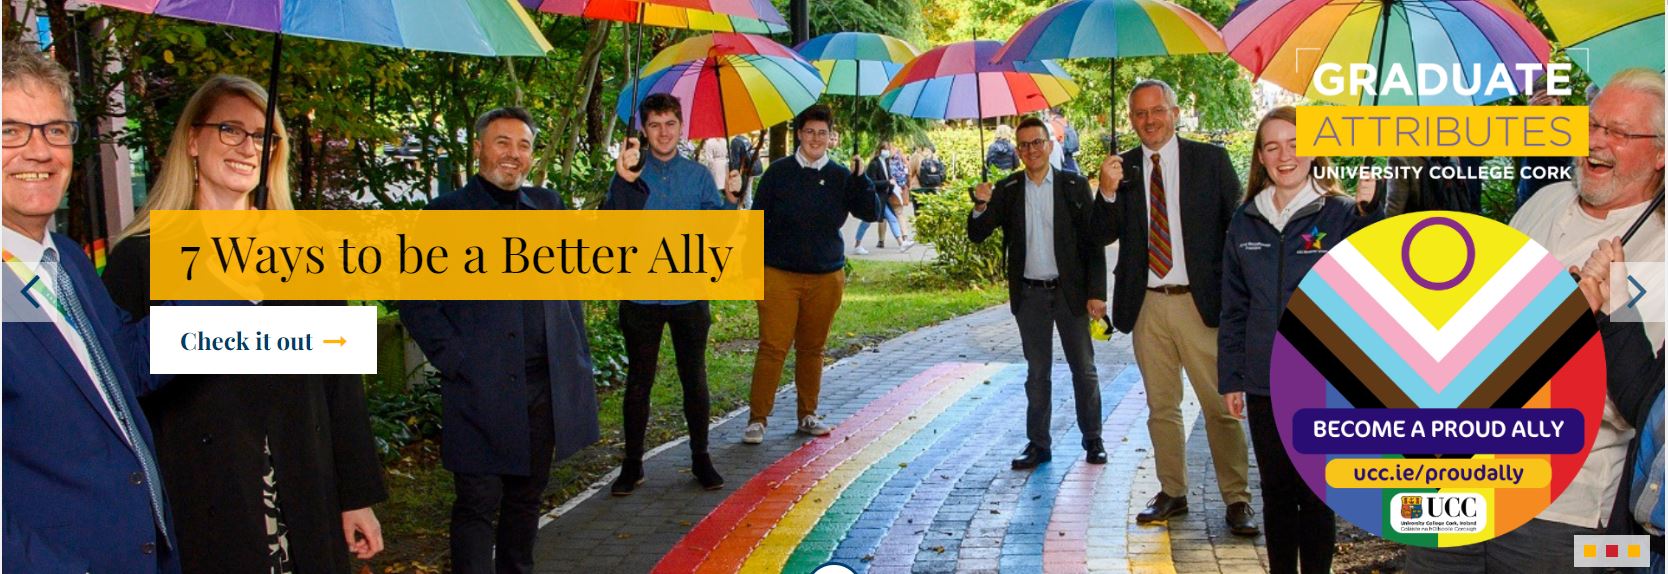 Graduate Attributes Programme launches Proud Ally campaign for students 